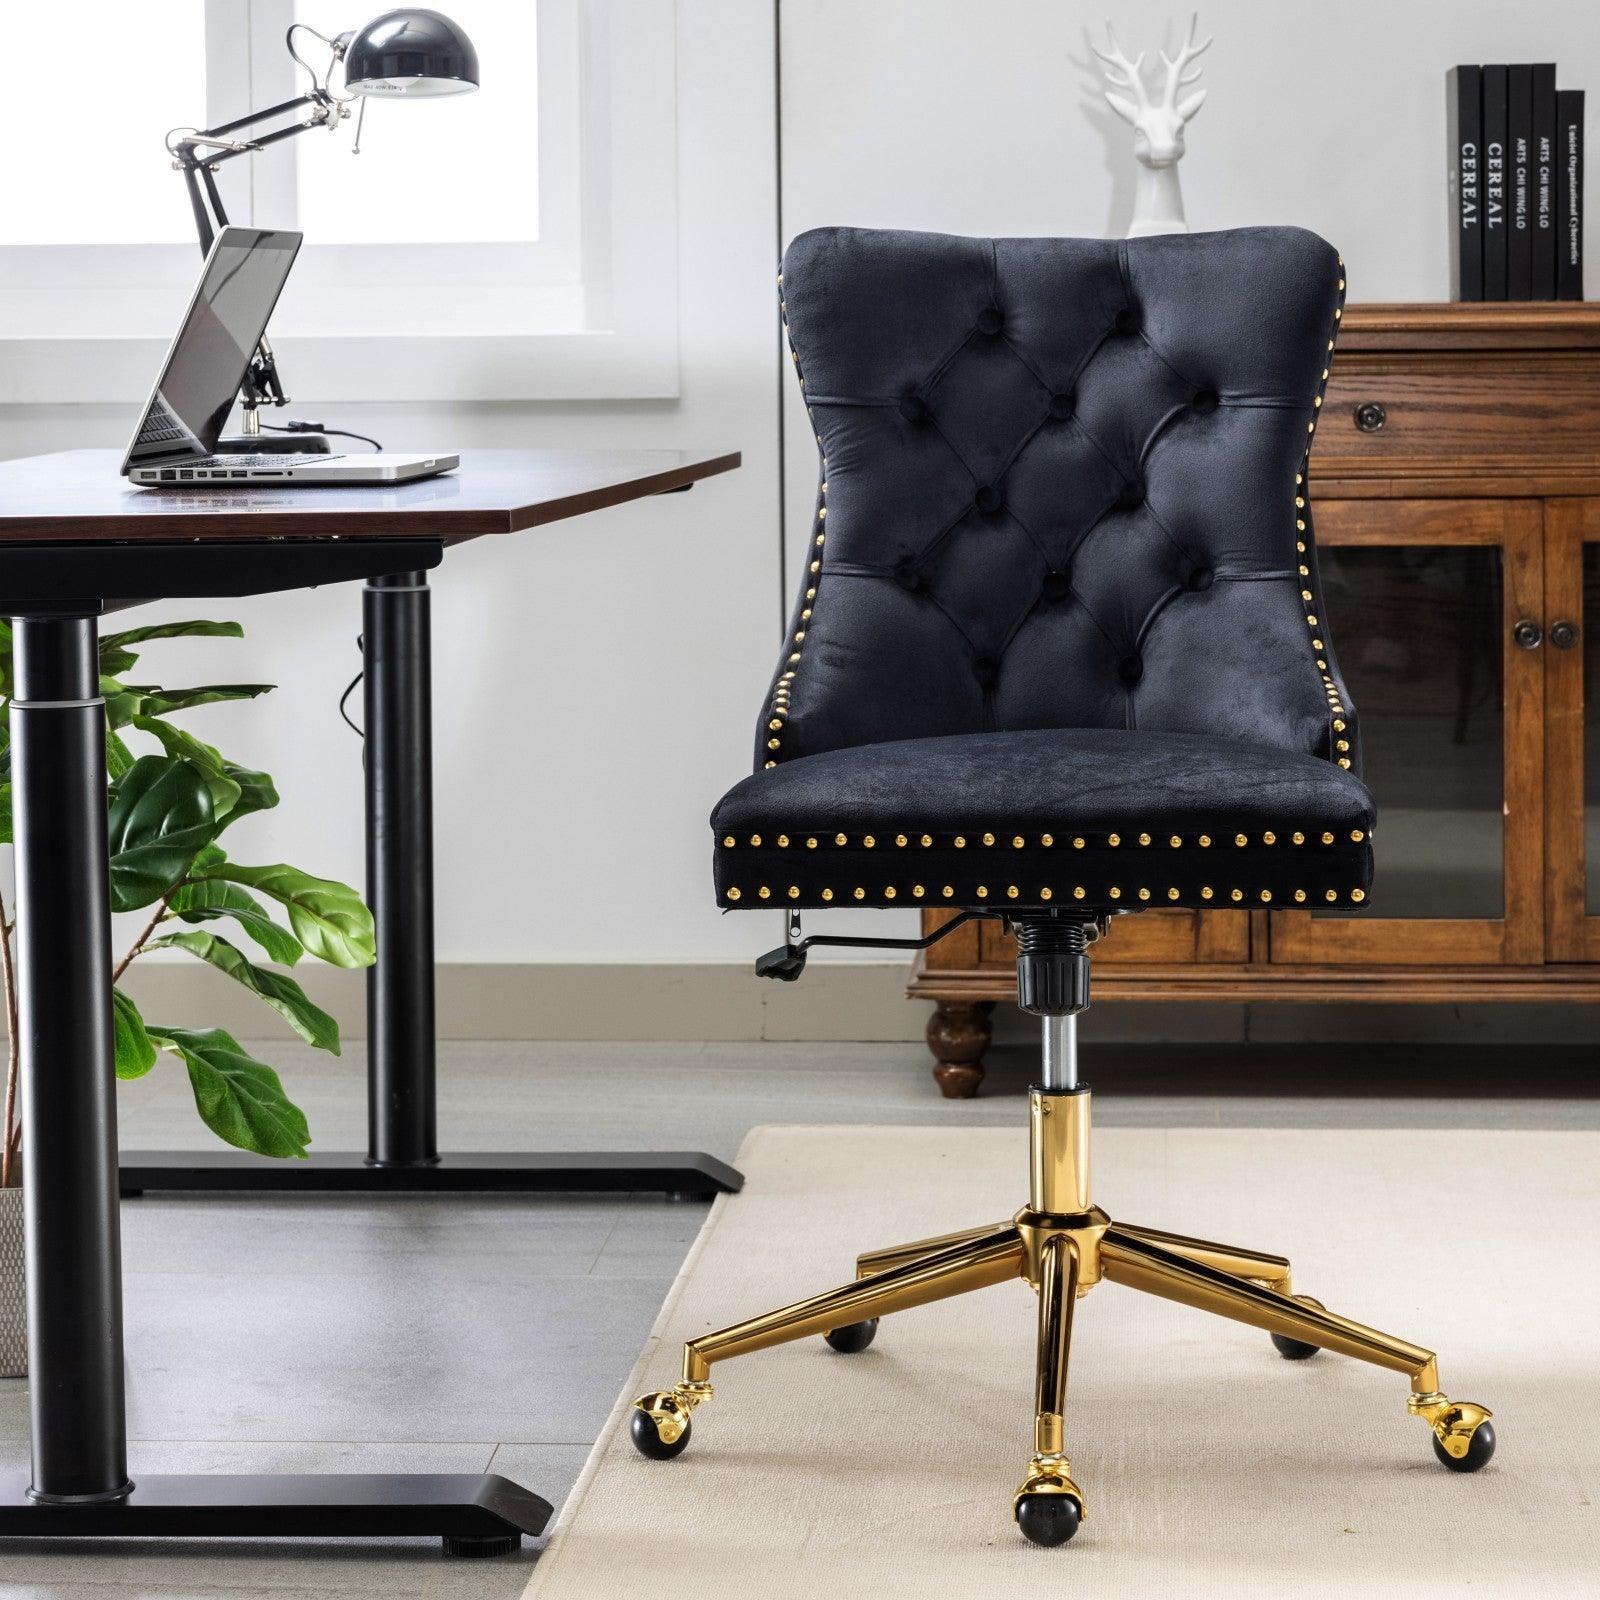 🆓🚛 Office Chair, Velvet Upholstered Tufted Button Home Office Chair With Golden Metal Base, Adjustable Desk Chair Swivel Office Chair (Black)